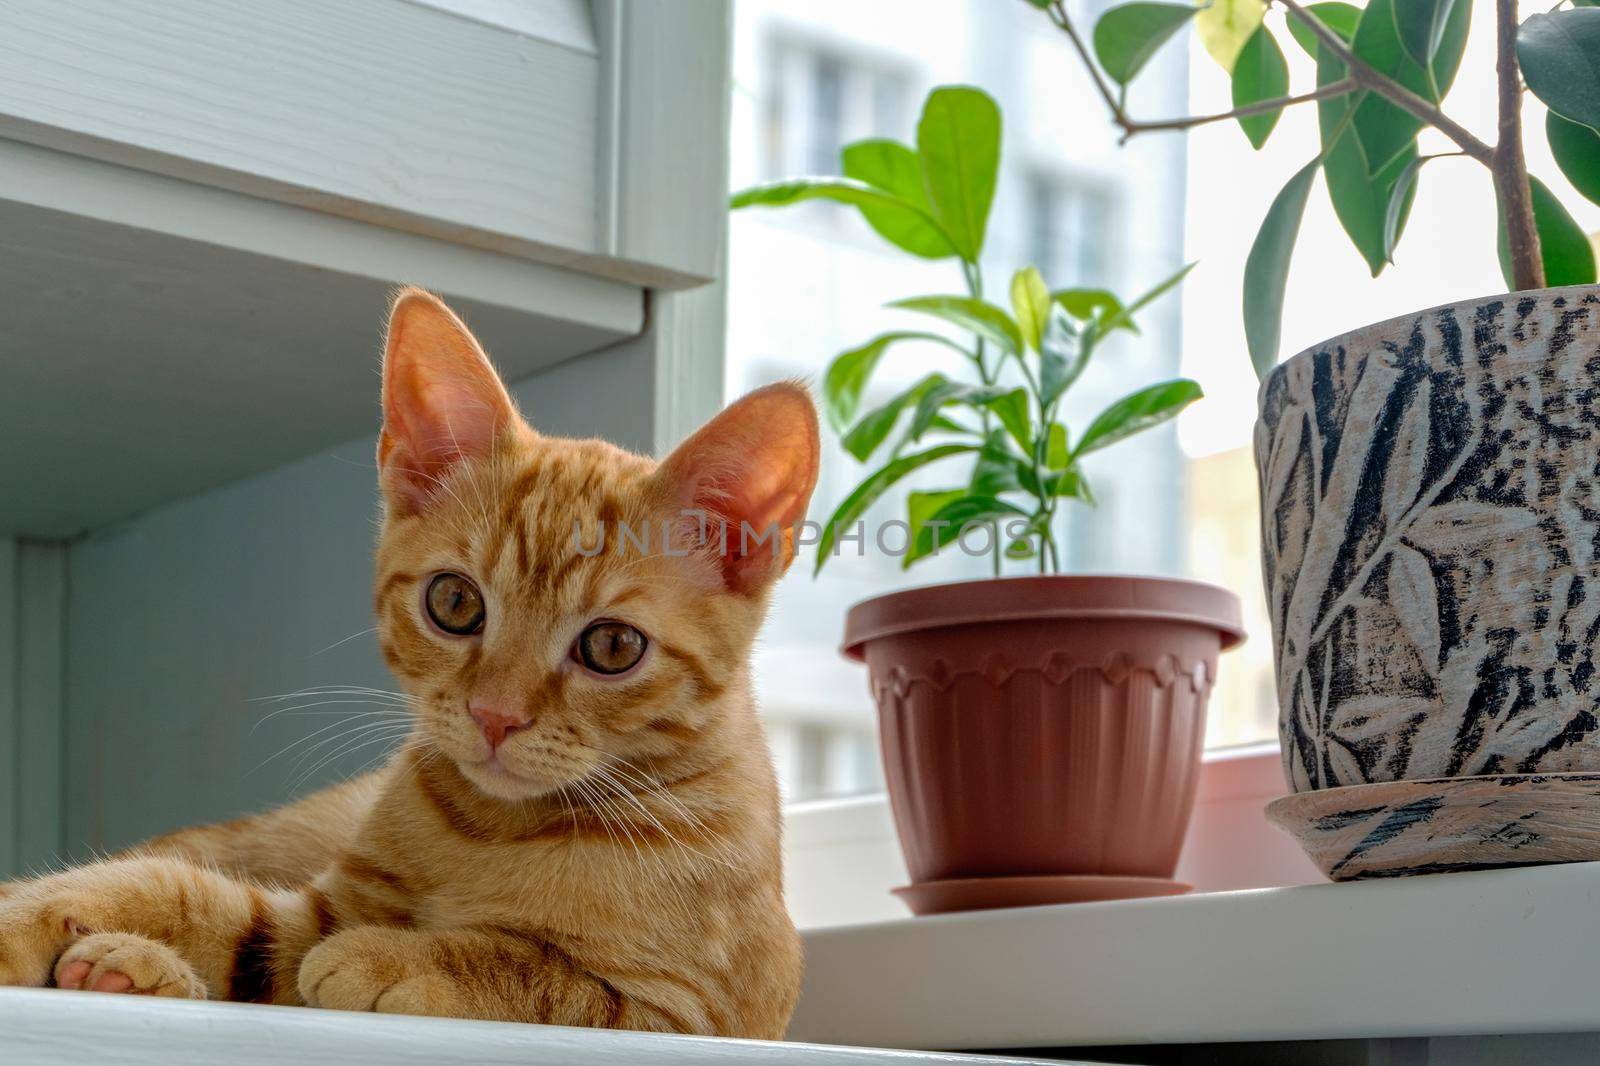 A ginger tabby kitten lies on the windowsill next to plants in flower pots and looks into the camera. Cats and houseplants. Selective focus.